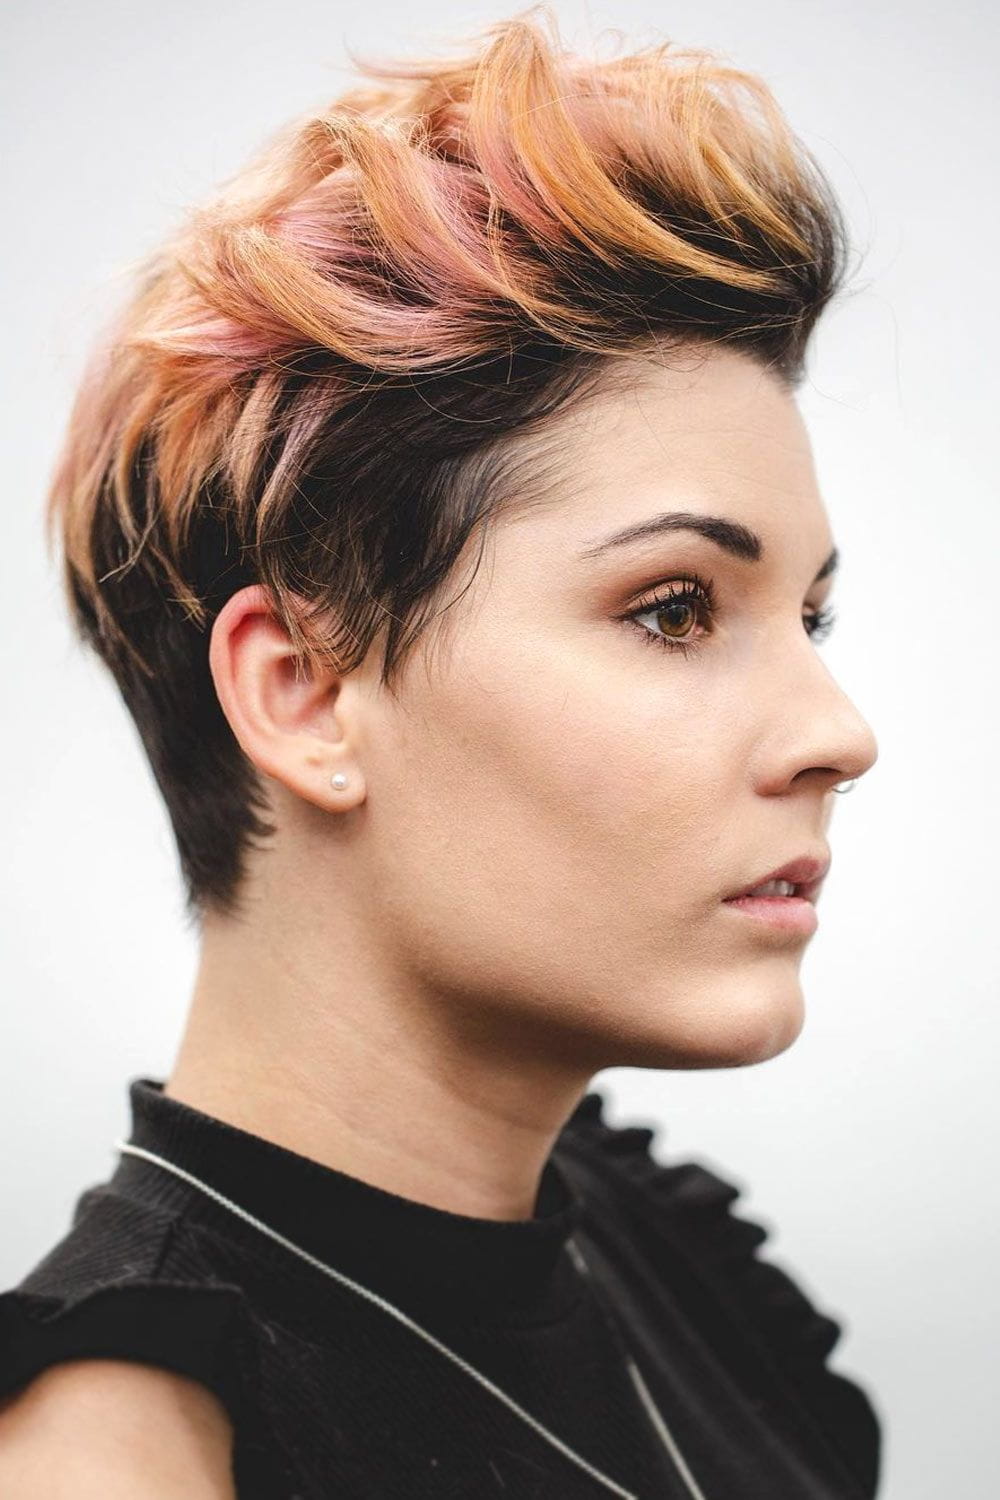 100+ Best Short Hairstyles & Haircuts For Women images 39